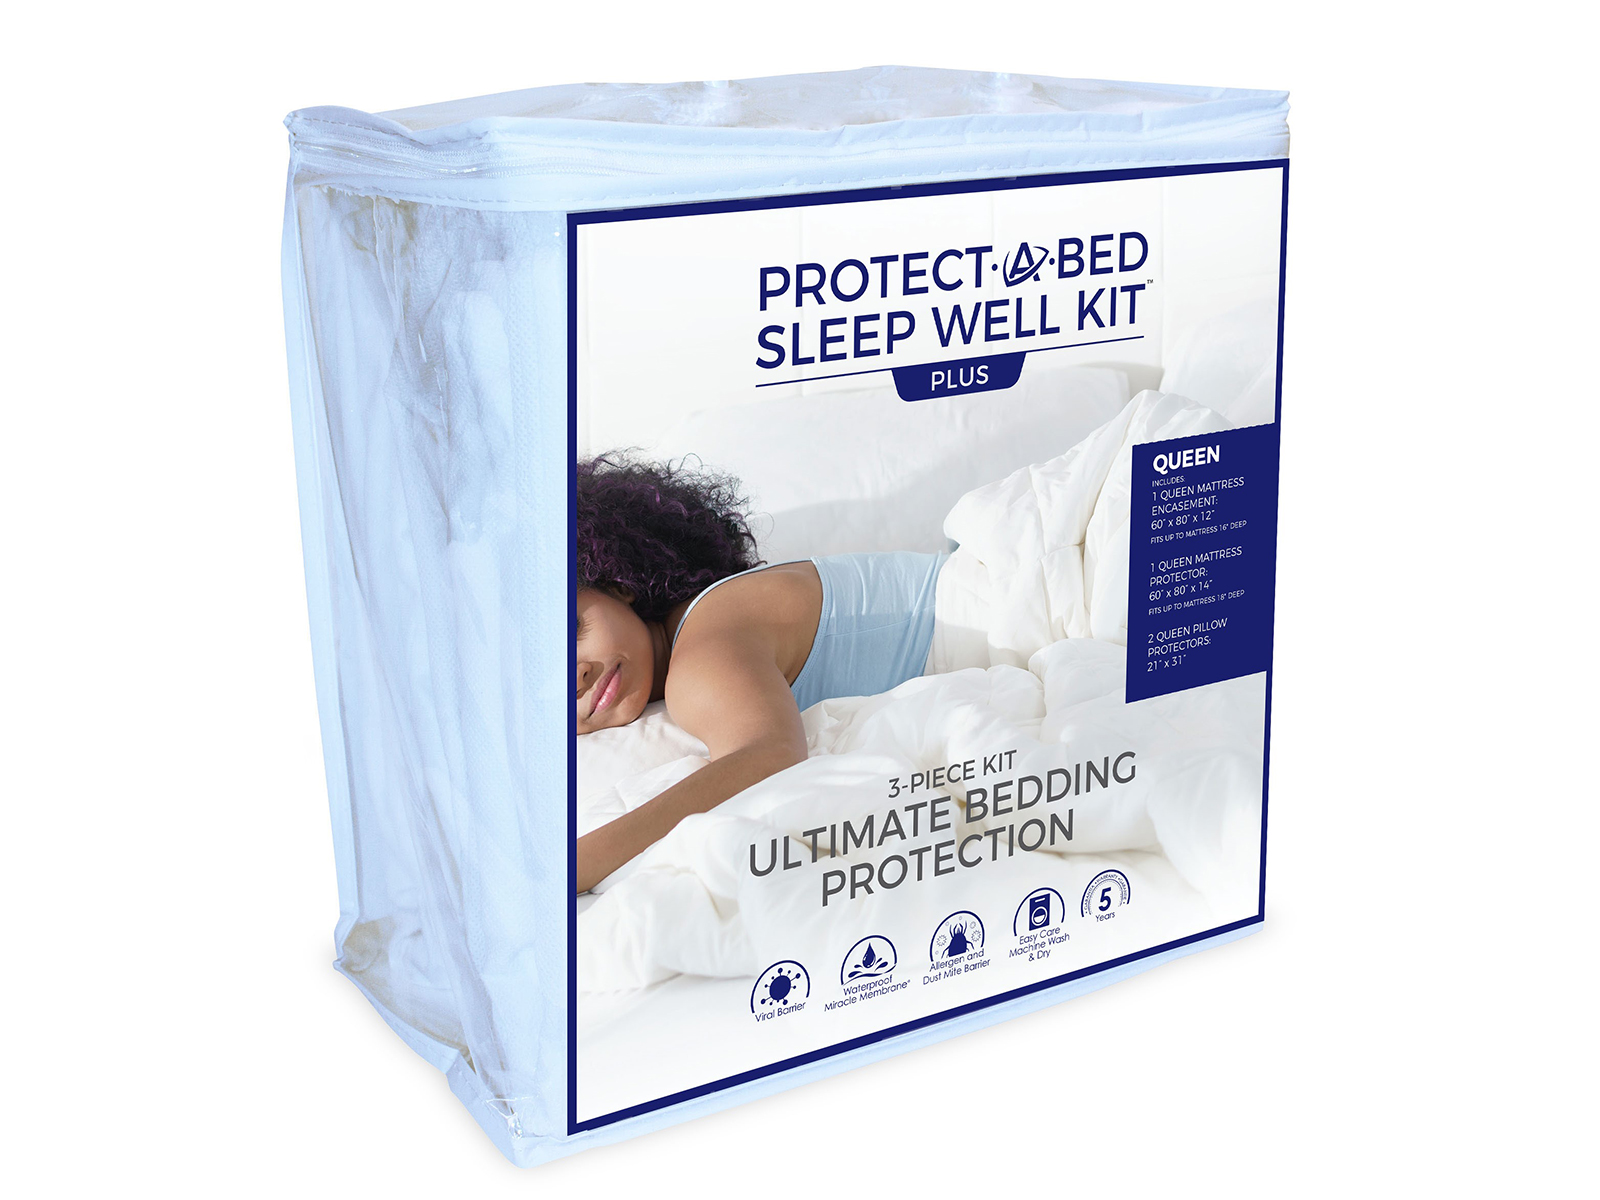 Protect-A-Bed Twin Sleep Well Kit